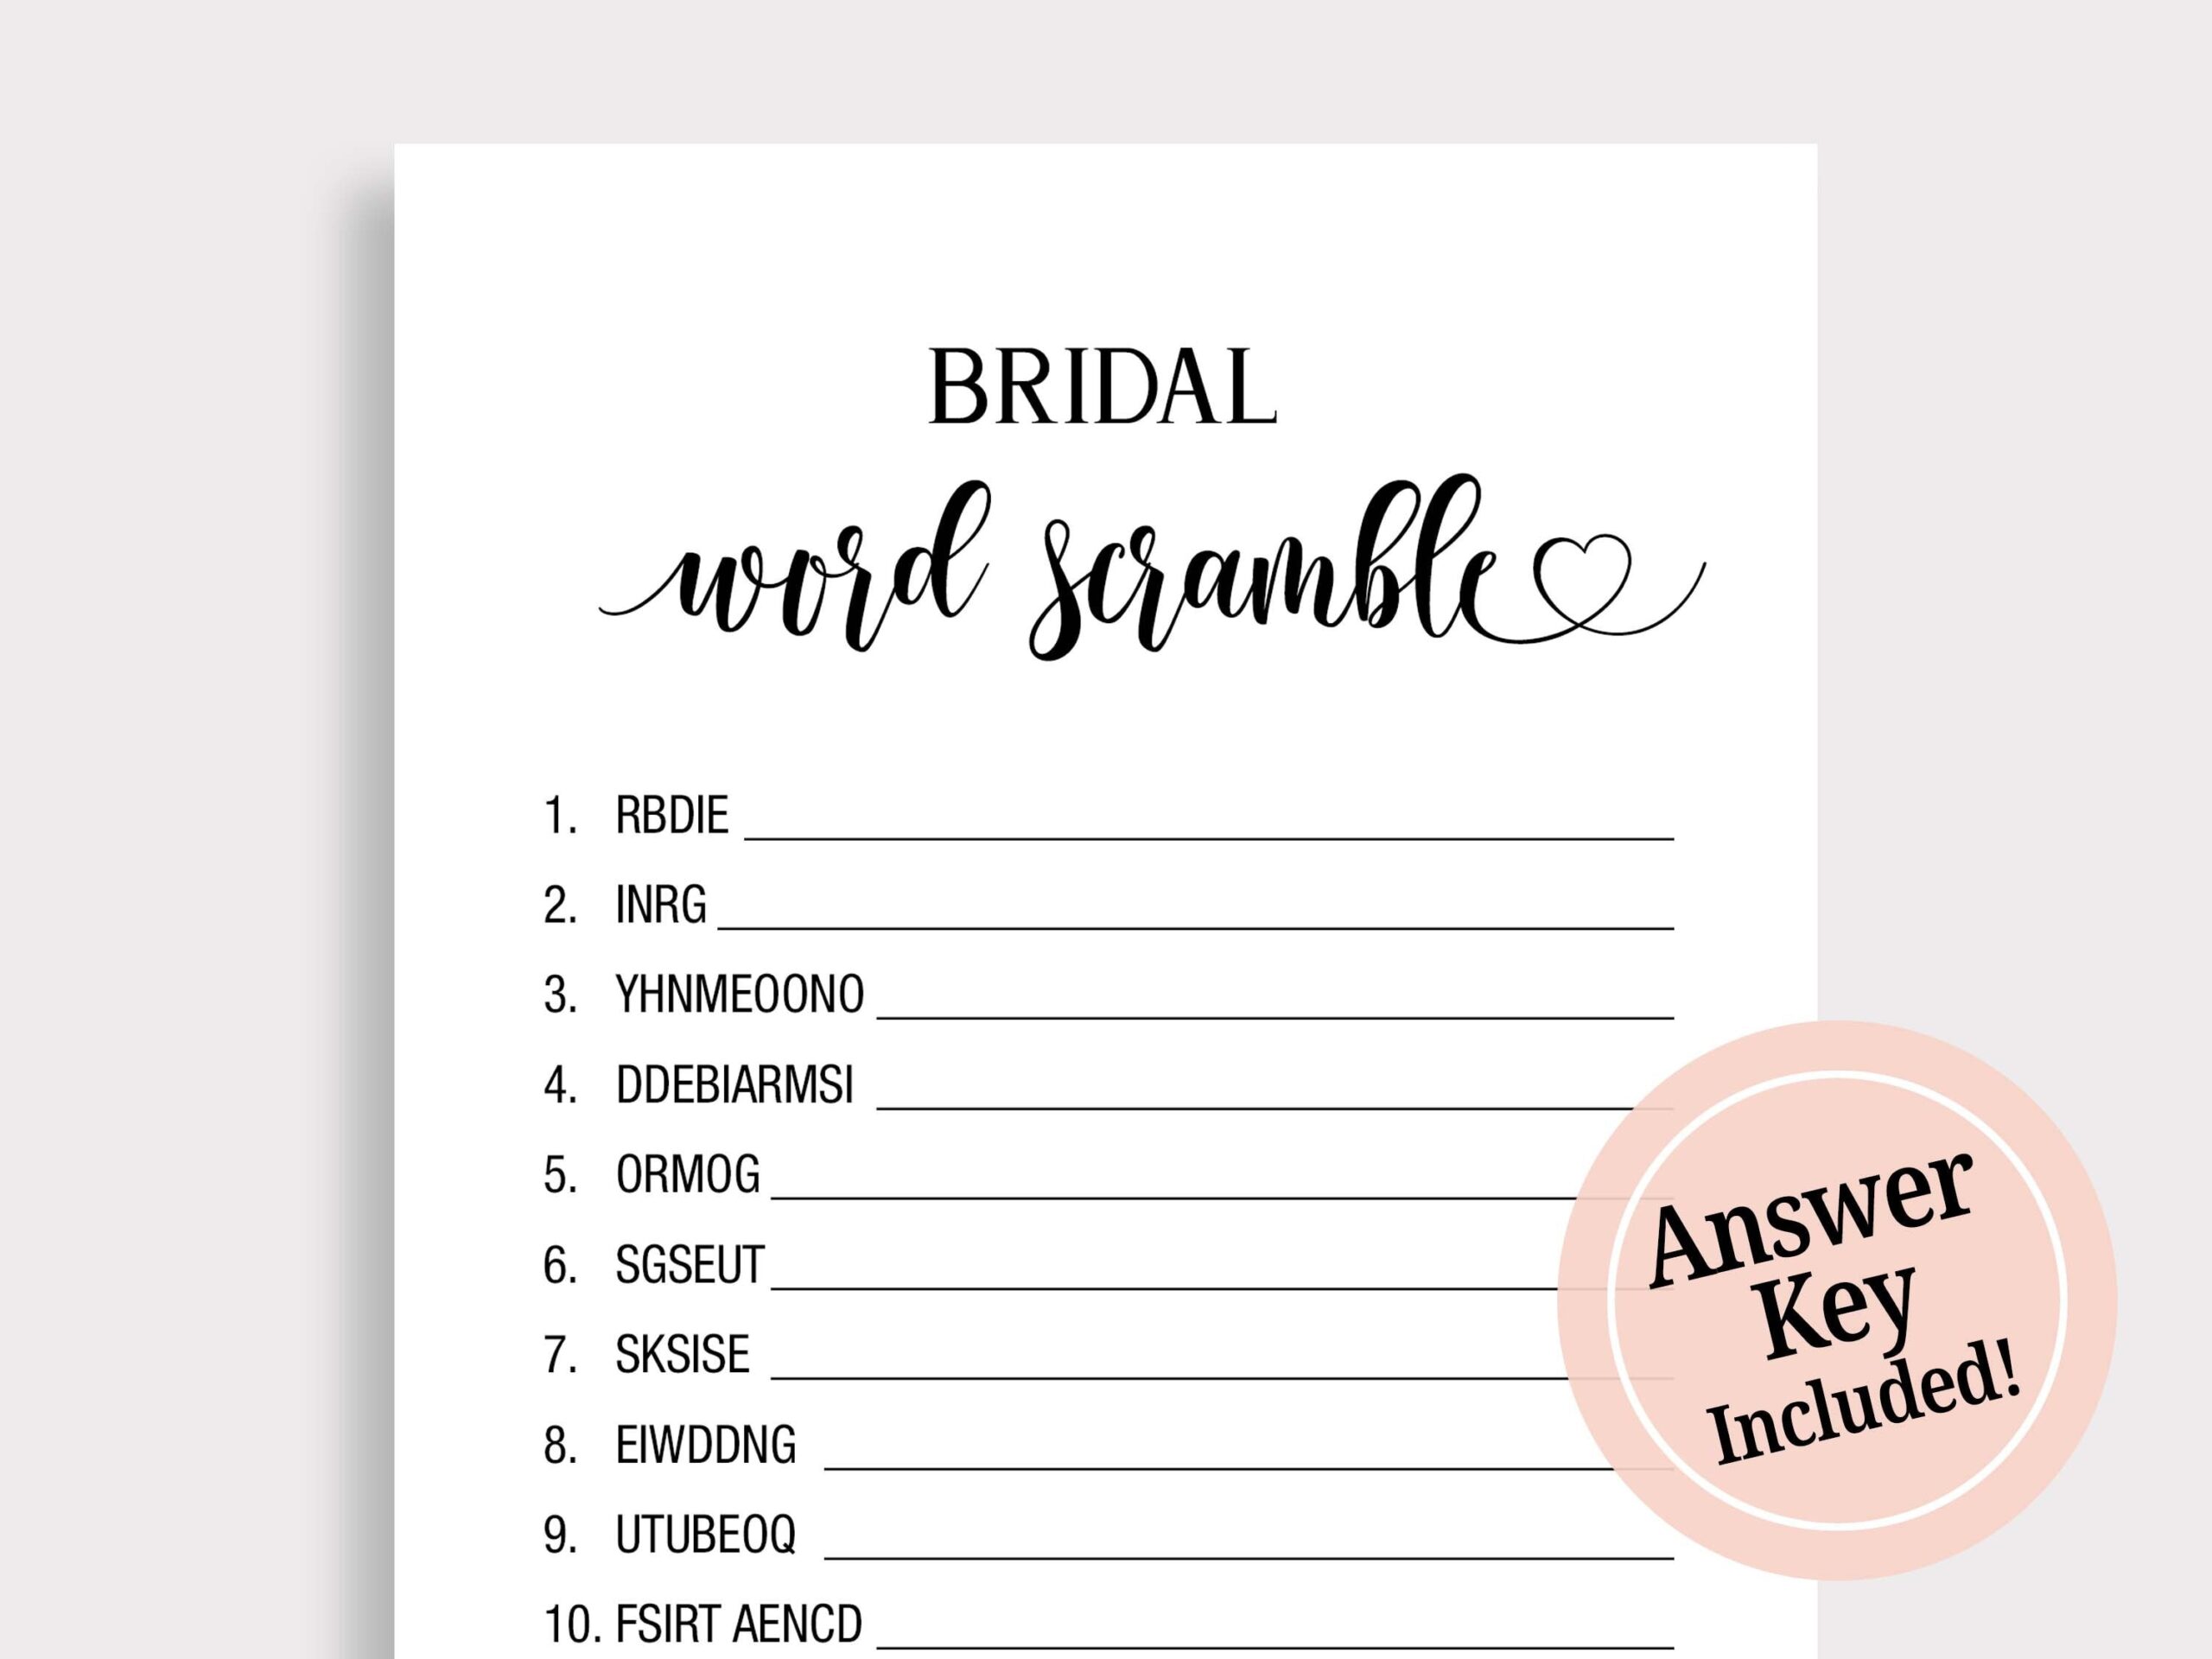 Word Scramble Bridal Shower Game Modern Wedding Shower Games Printable Scramble Games Minimal Word Search Puzzle Instant Download W18 Etsy - Free Printable Bridal Shower Games Word Scramble